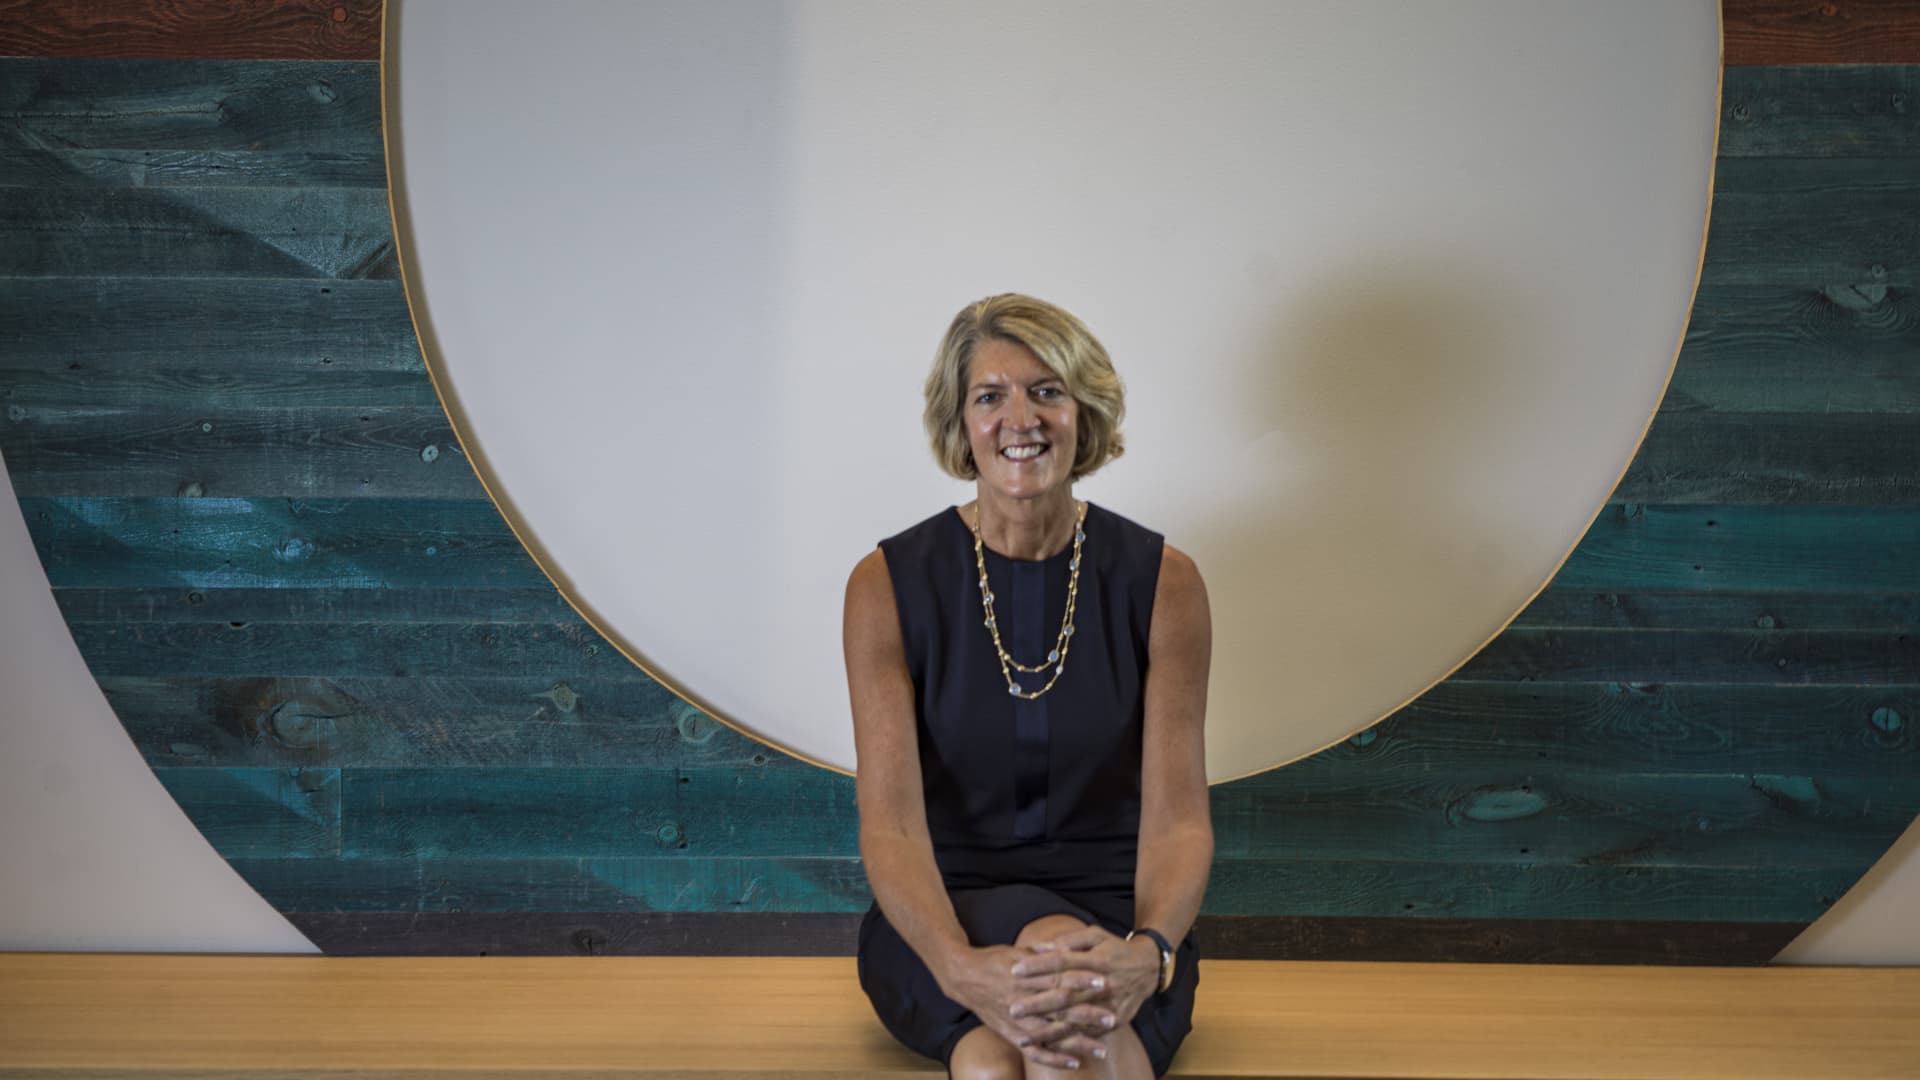 Land O'Lakes CEO Beth Ford photographed in the company's headquarters in Arden Hills, Minn., July 29, 2021. (Photo by Richard Tsong-Taatarii/Star Tribune via Getty Images)